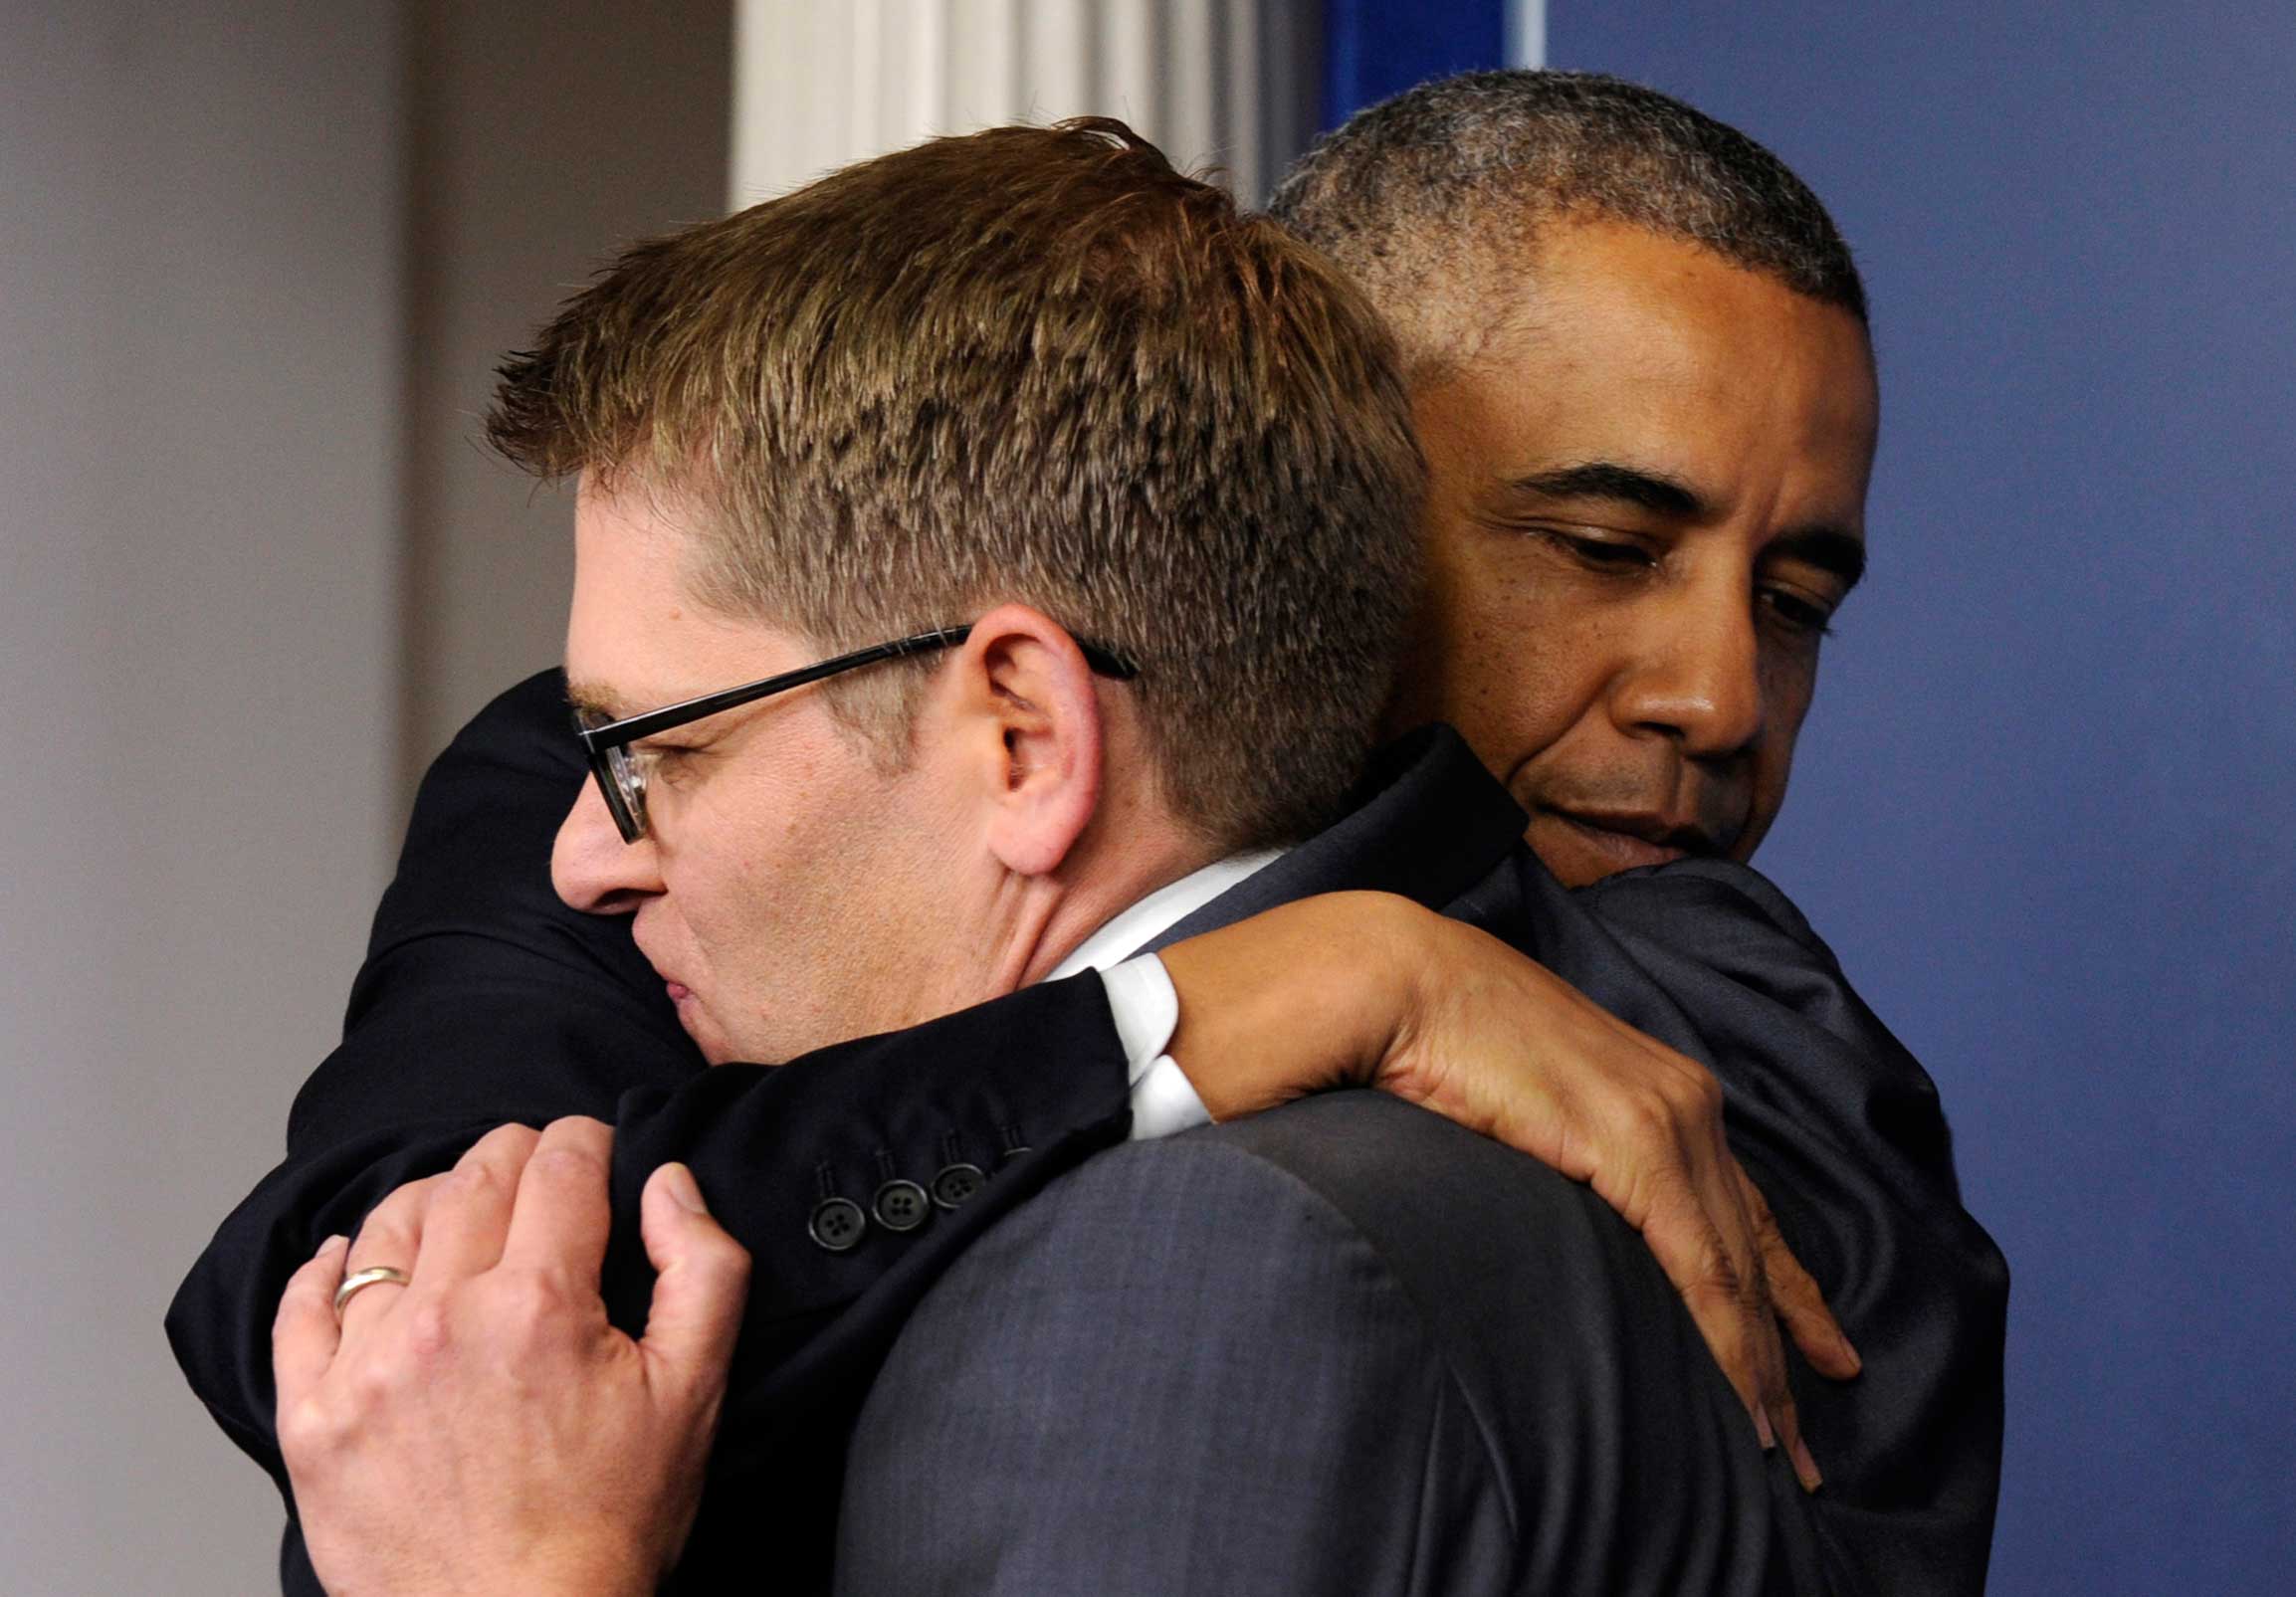 President Barack Obama gives White House press secretary Jay Carney a hug after announcing that Carney will step down later next month, during a surprise visit to the Brady Press Briefing Room of the White House, Friday, May 30, 2014. The president announced Carney's departure in a surprise appearance at in the White House press briefing room Friday. He said principal deputy press secretary Josh Earnest will take over the job. (AP Photo/Susan Walsh)